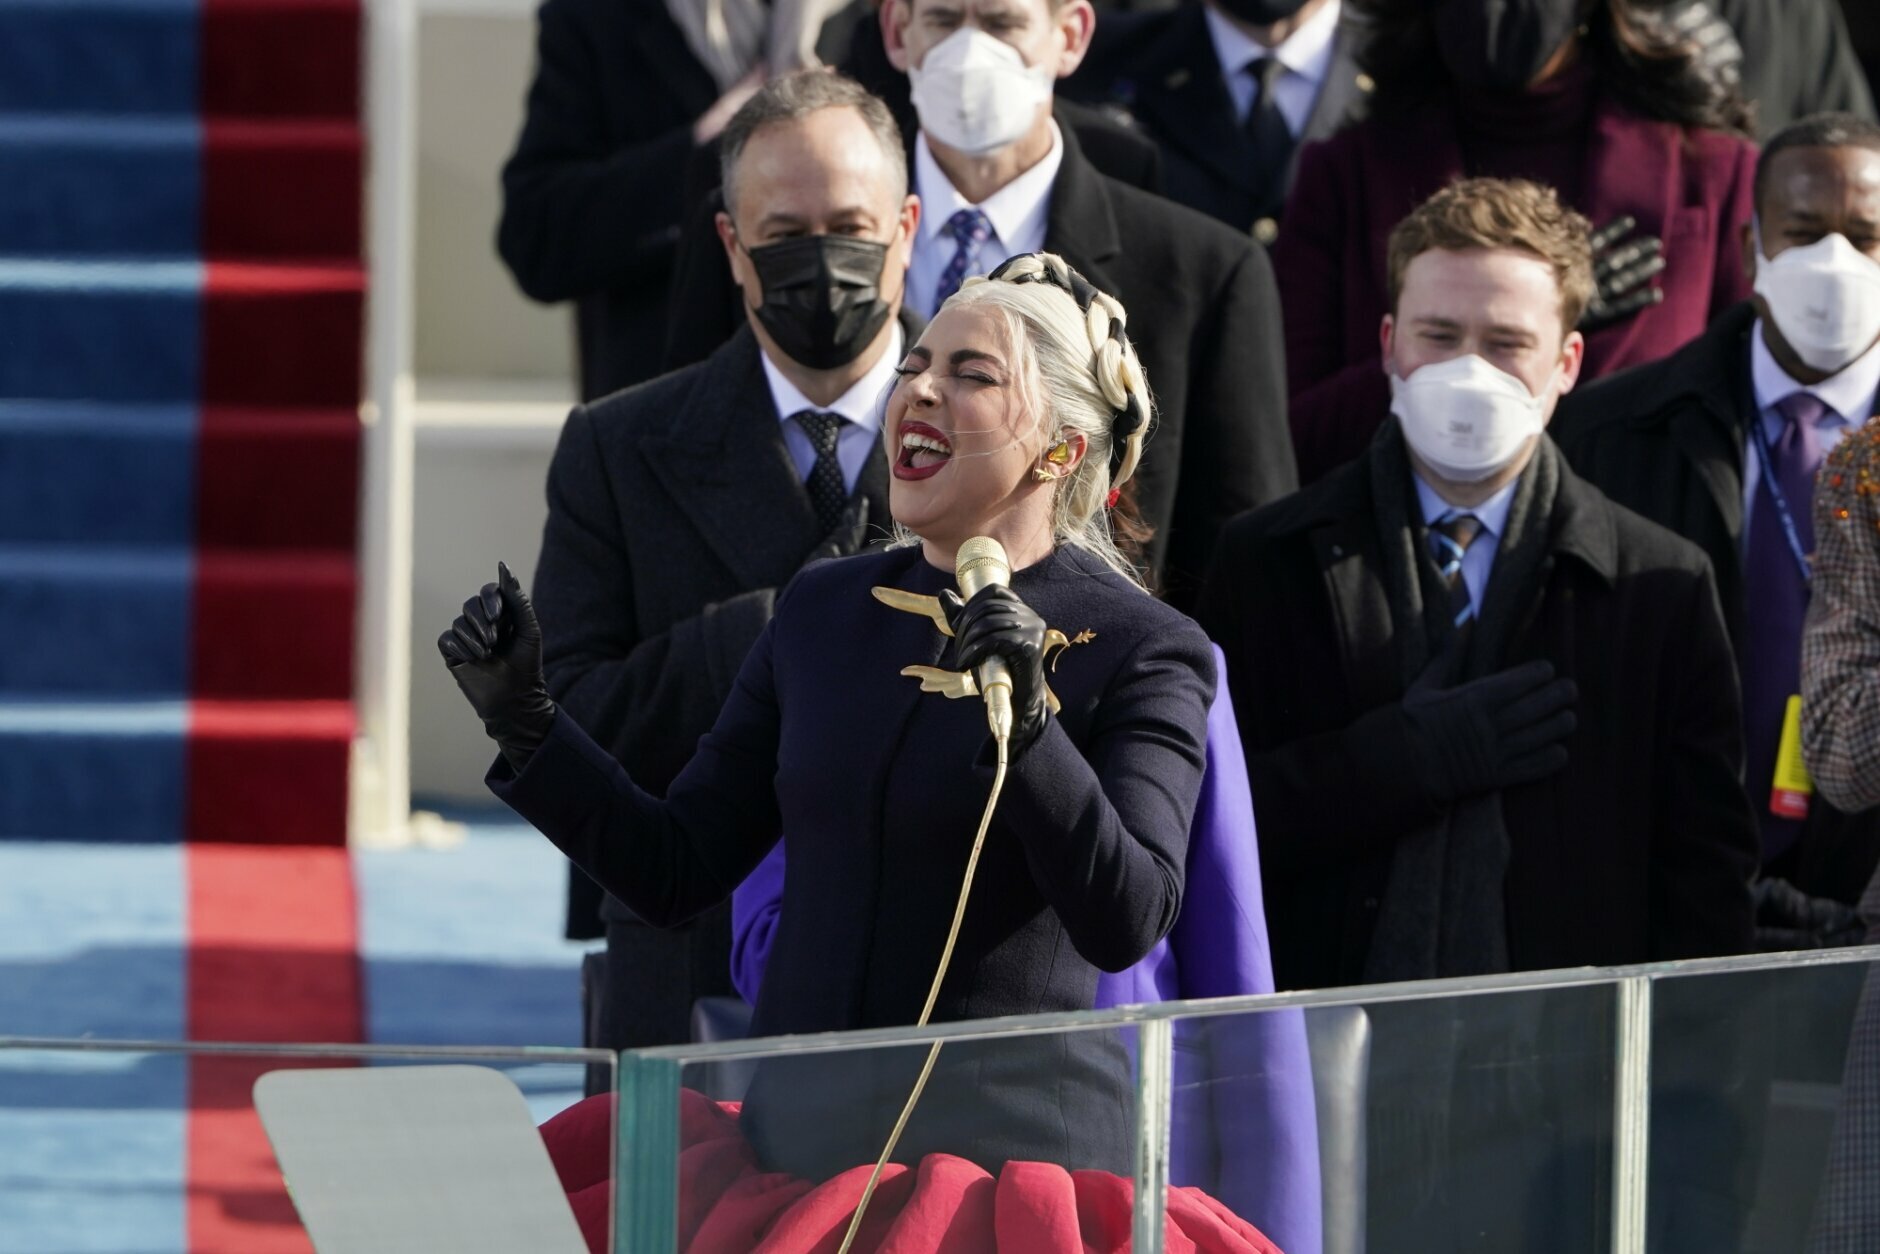 <p>Lady Gaga sings the National Anthem during the 59th Presidential Inauguration at the U.S. Capitol in Washington, Wednesday, Jan. 20, 2021. (AP Photo/Patrick Semansky, Pool)</p>
